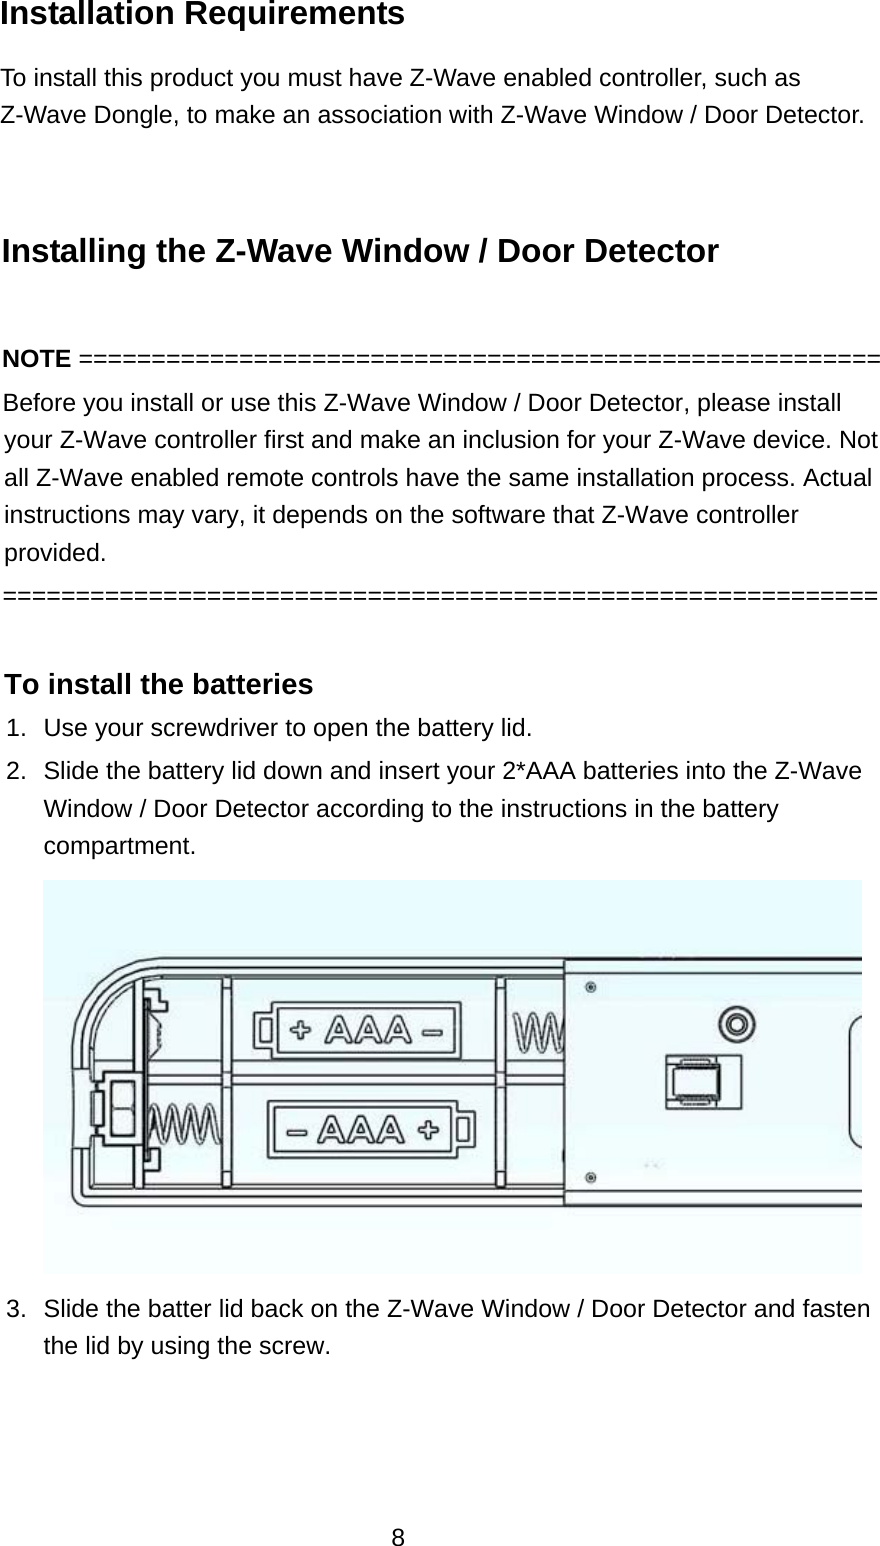  8 Installation Requirements   To install this product you must have Z-Wave enabled controller, such as Z-Wave Dongle, to make an association with Z-Wave Window / Door Detector.  Installing the Z-Wave Window / Door Detector  NOTE =======================================================         Before you install or use this Z-Wave Window / Door Detector, please install your Z-Wave controller first and make an inclusion for your Z-Wave device. Not all Z-Wave enabled remote controls have the same installation process. Actual instructions may vary, it depends on the software that Z-Wave controller provided.     ============================================================  To install the batteries   1.  Use your screwdriver to open the battery lid. 2.  Slide the battery lid down and insert your 2*AAA batteries into the Z-Wave Window / Door Detector according to the instructions in the battery compartment.       3.  Slide the batter lid back on the Z-Wave Window / Door Detector and fasten the lid by using the screw.    